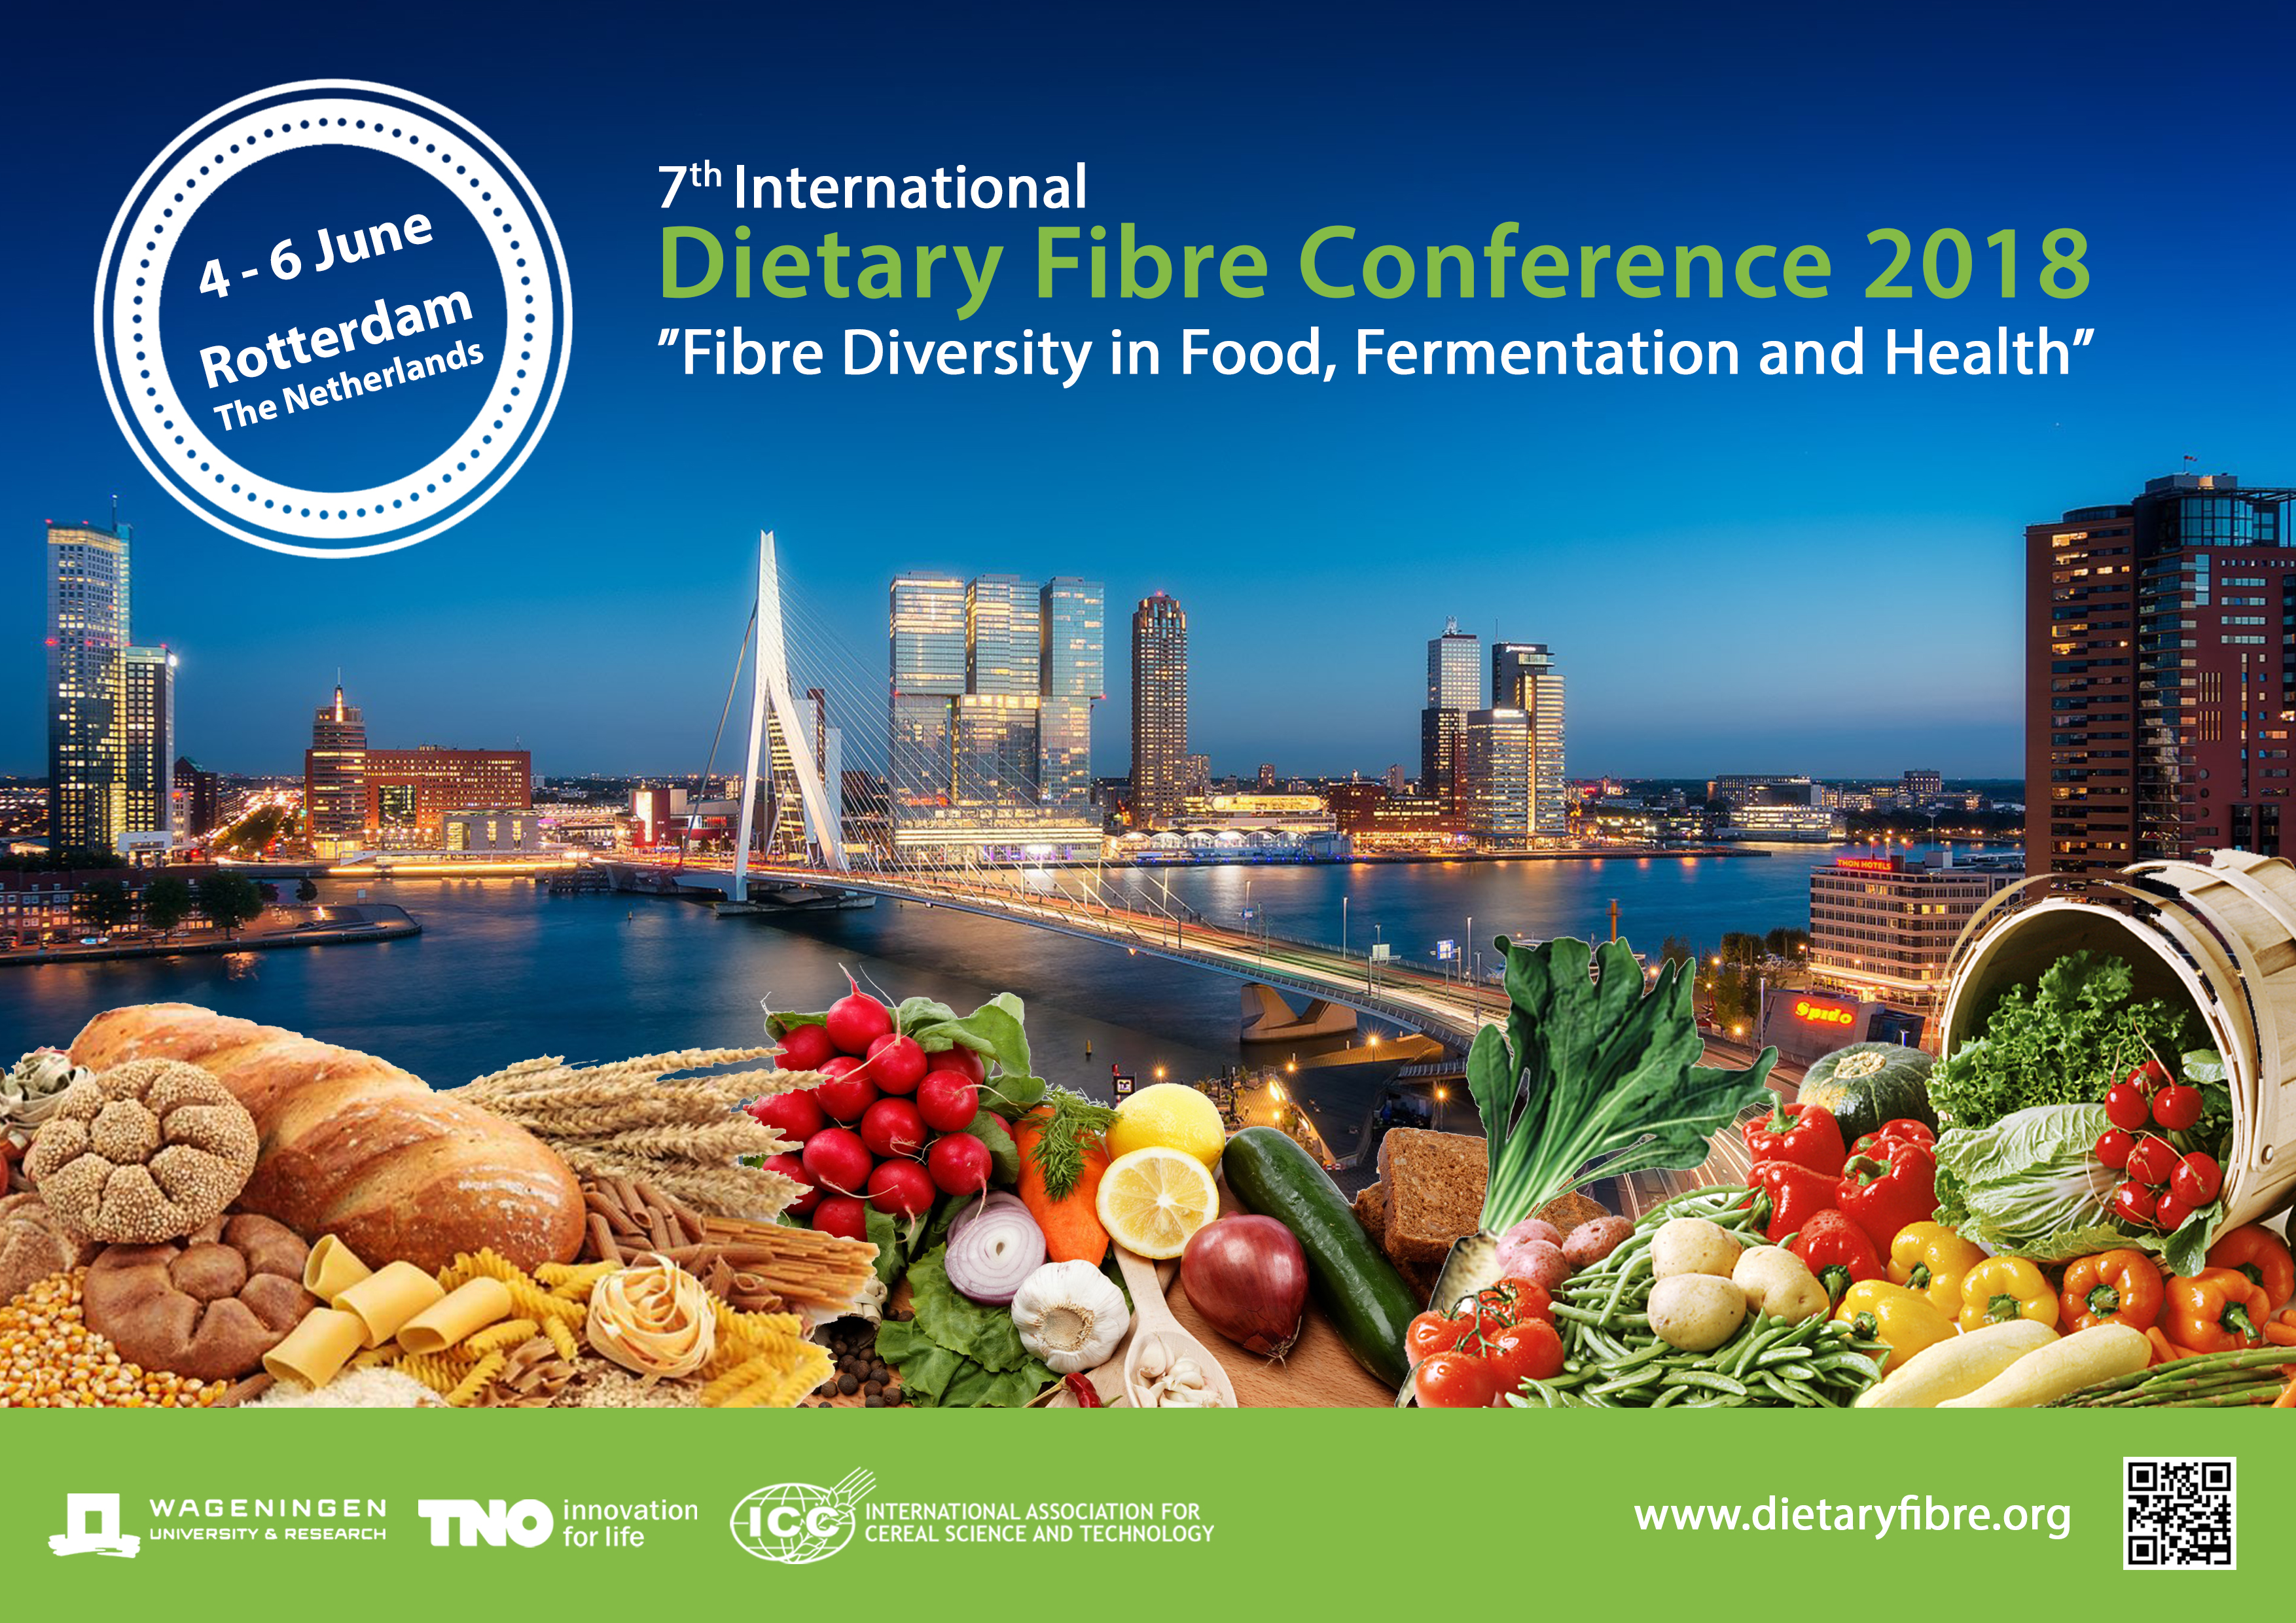 7th International Dietary Fibre Conference 2018 - Final programme available!